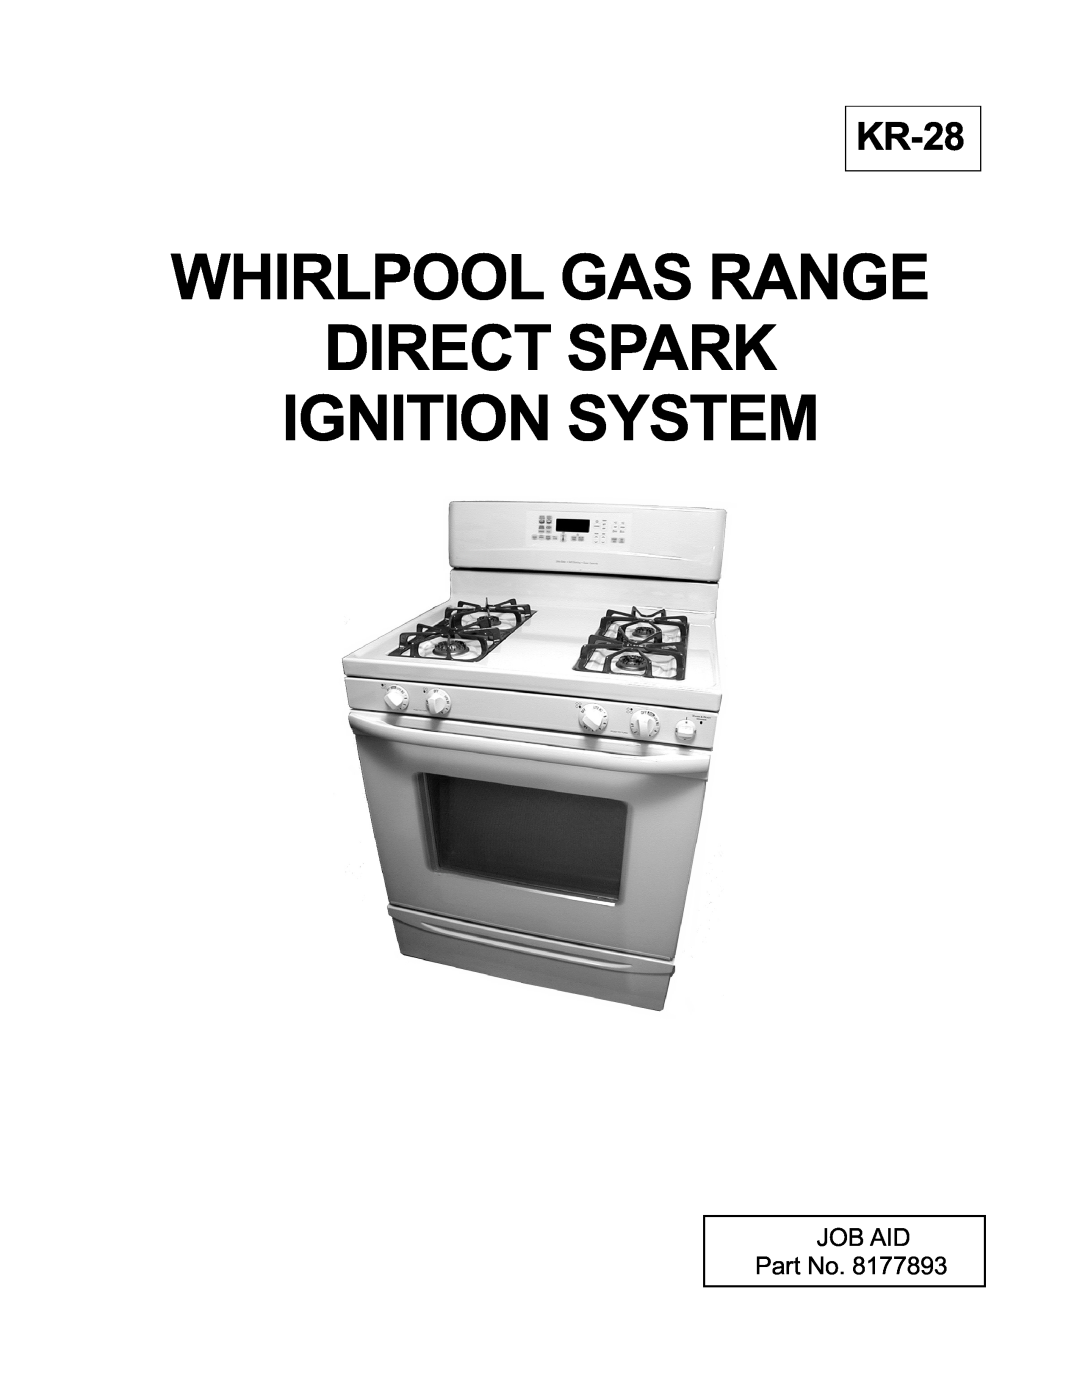 Whirlpool KR-28 manual Whirlpool Gas Range Direct Spark Ignition System, Job Aid 